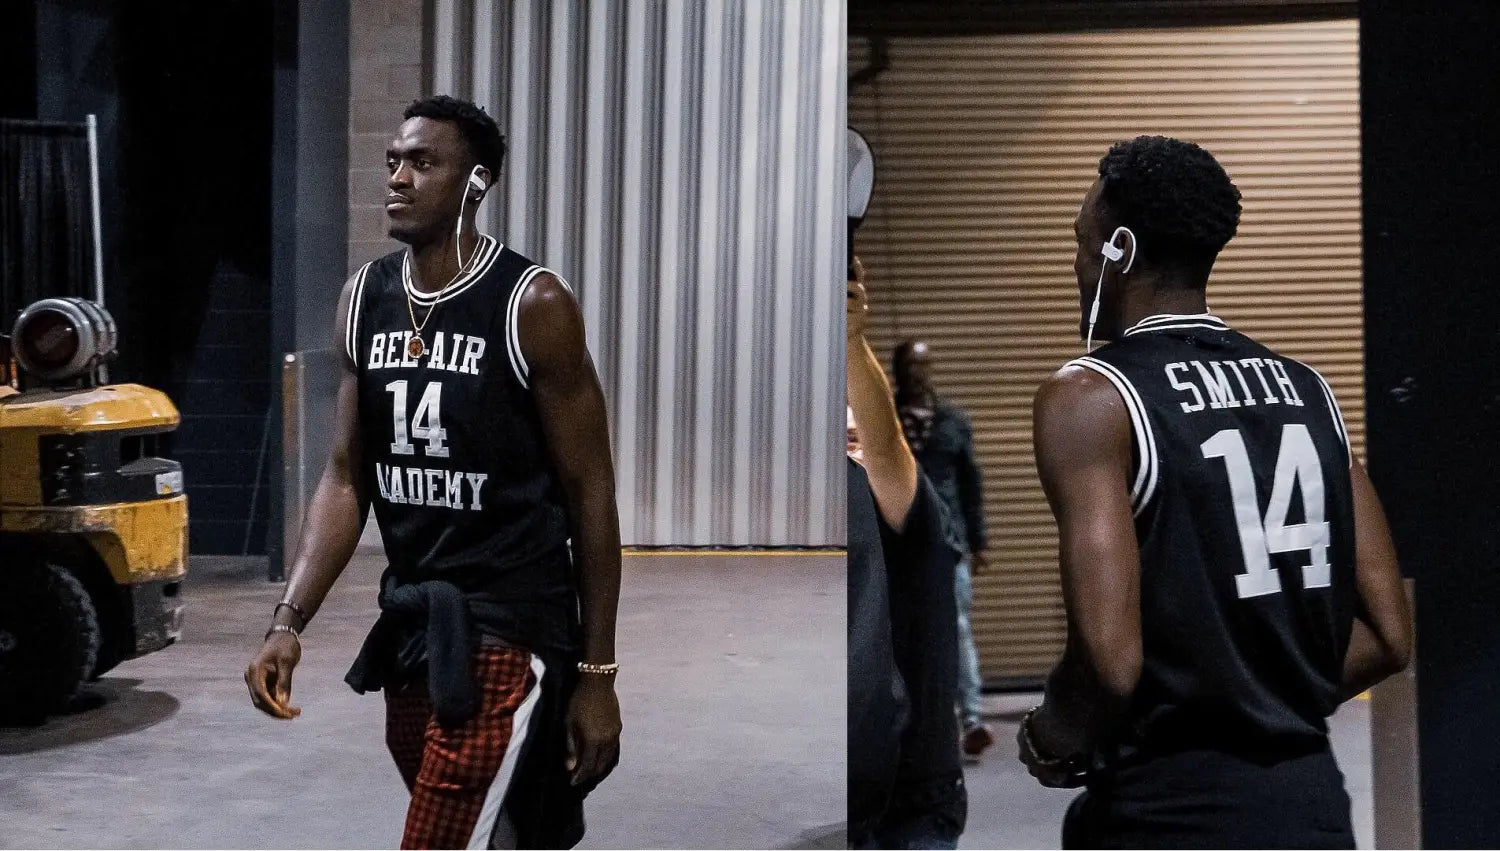 Pascal Siakam wearing Will Smith fresh prince of belair TV show basketball jersey